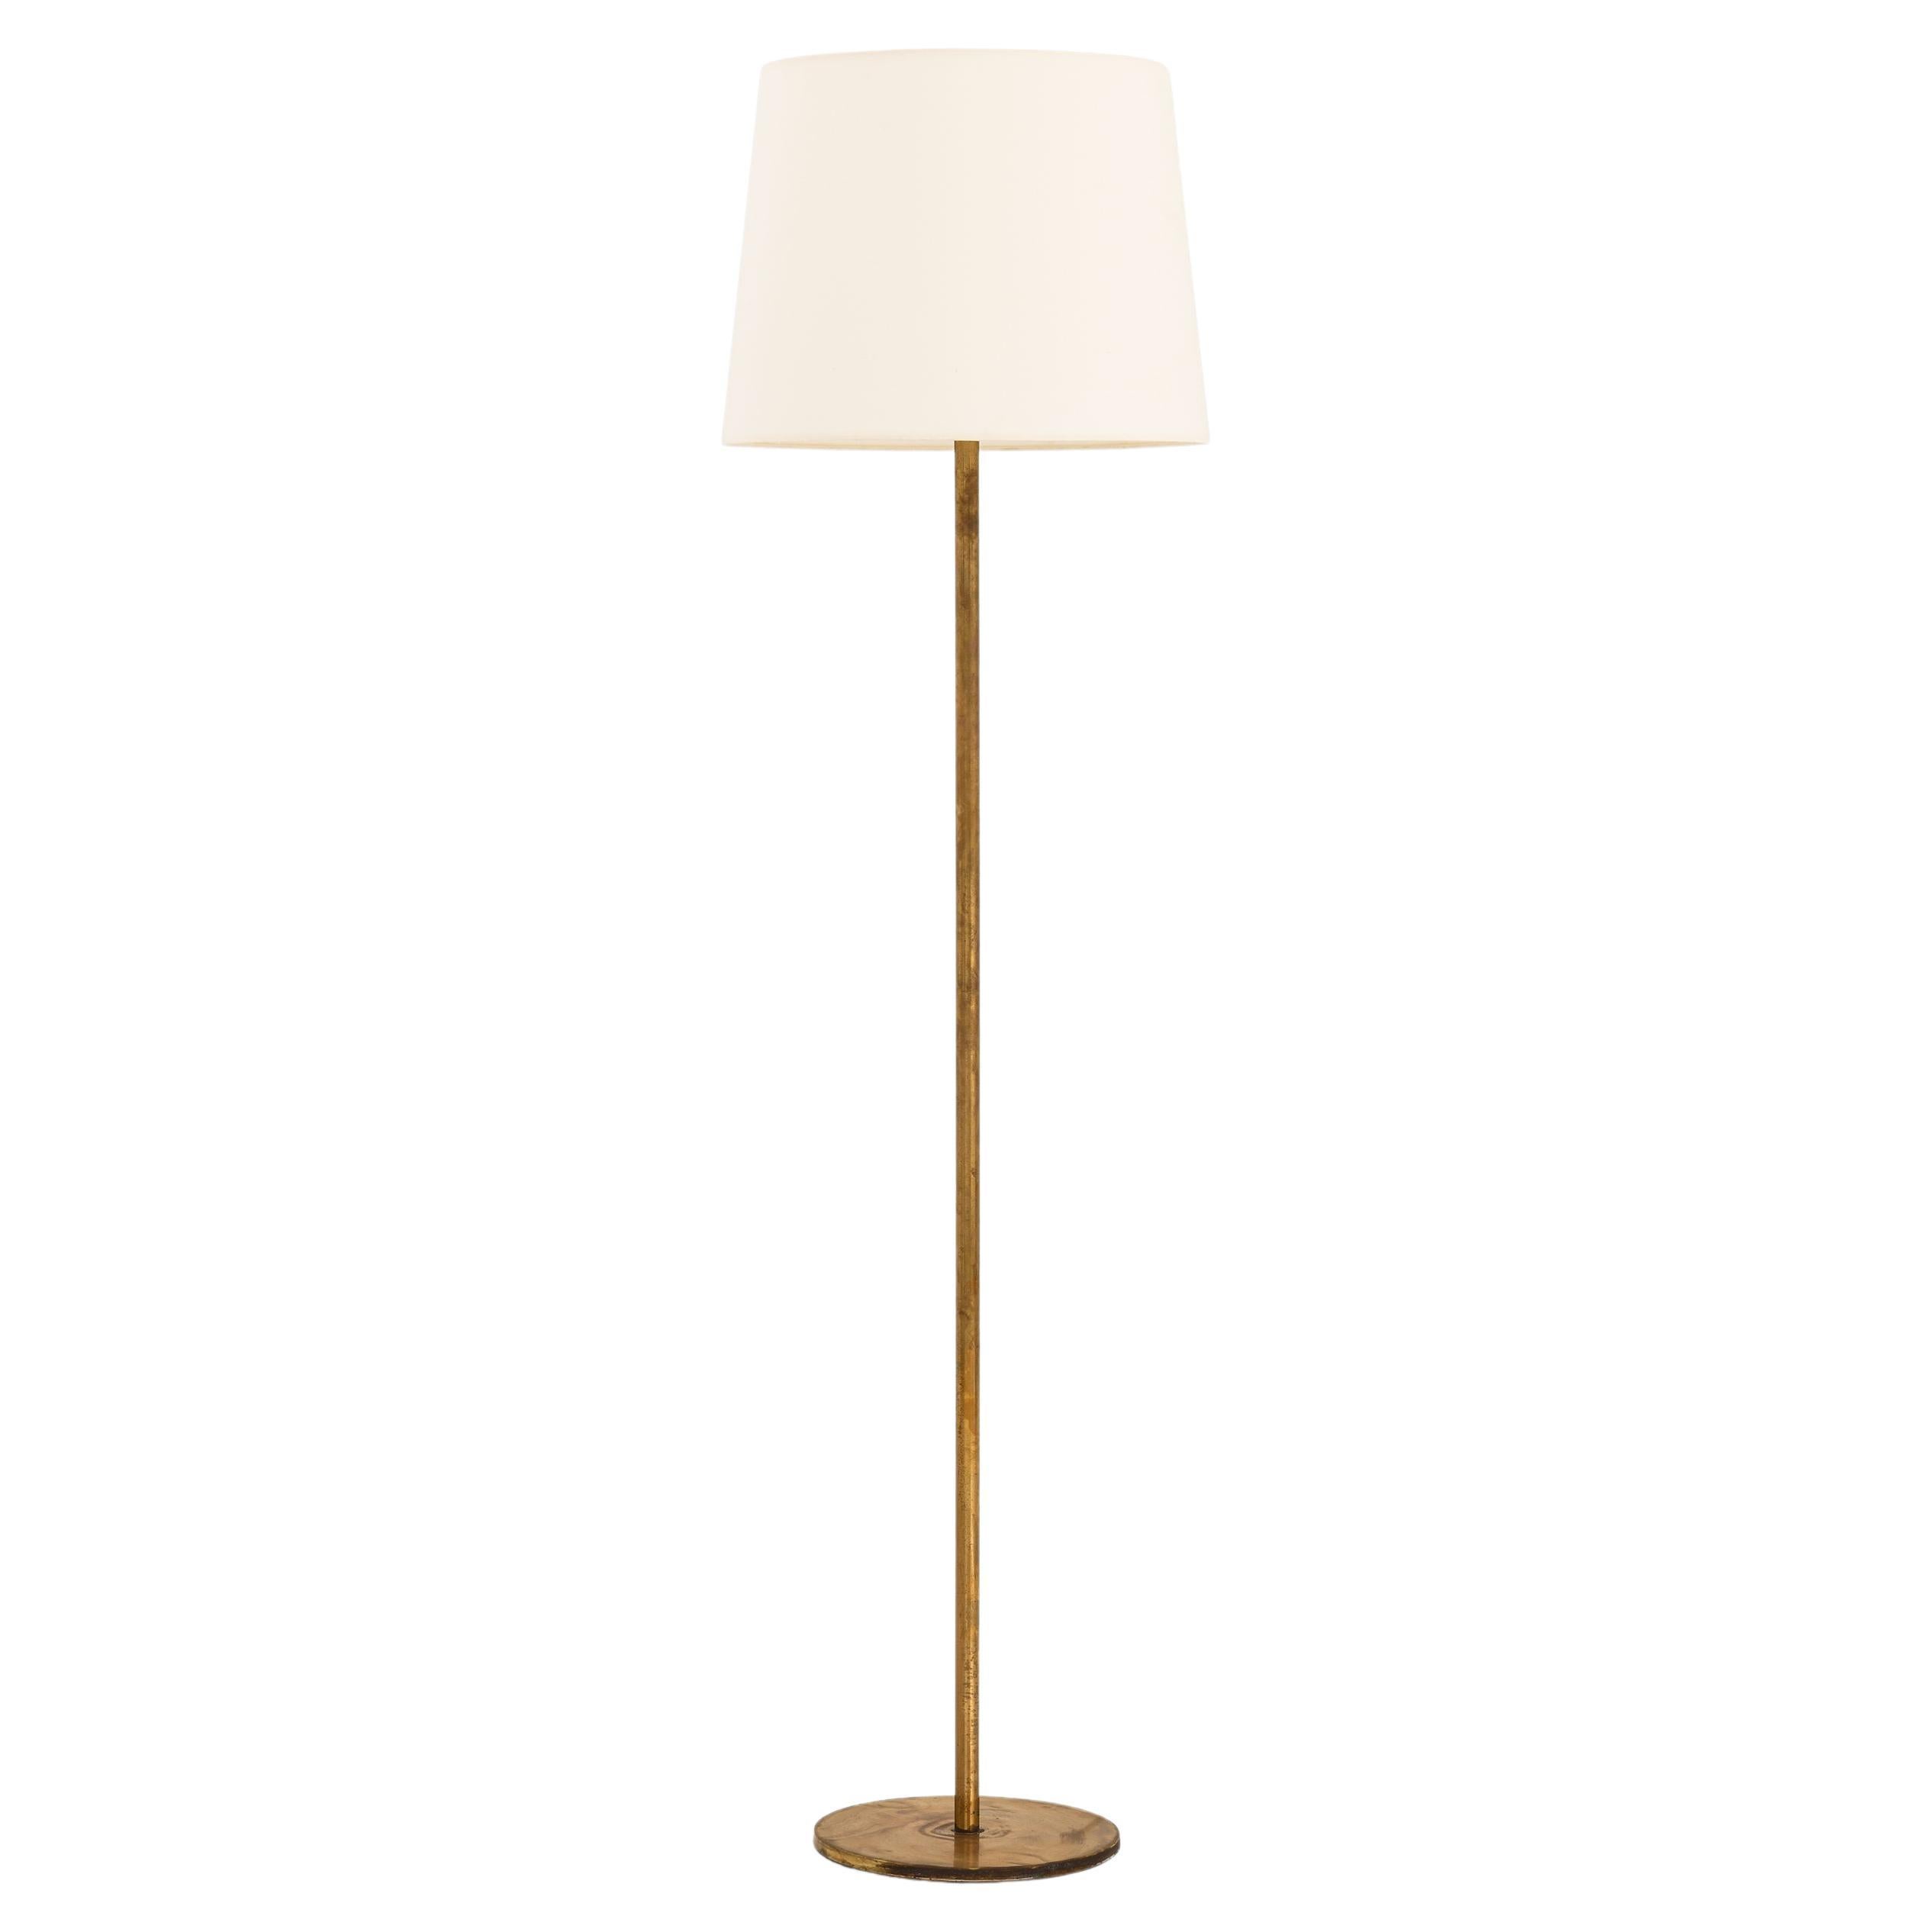 Floor Lamp in Brass, Plastic and Fabric by Uno and Östen Kristiansson, 1960's For Sale